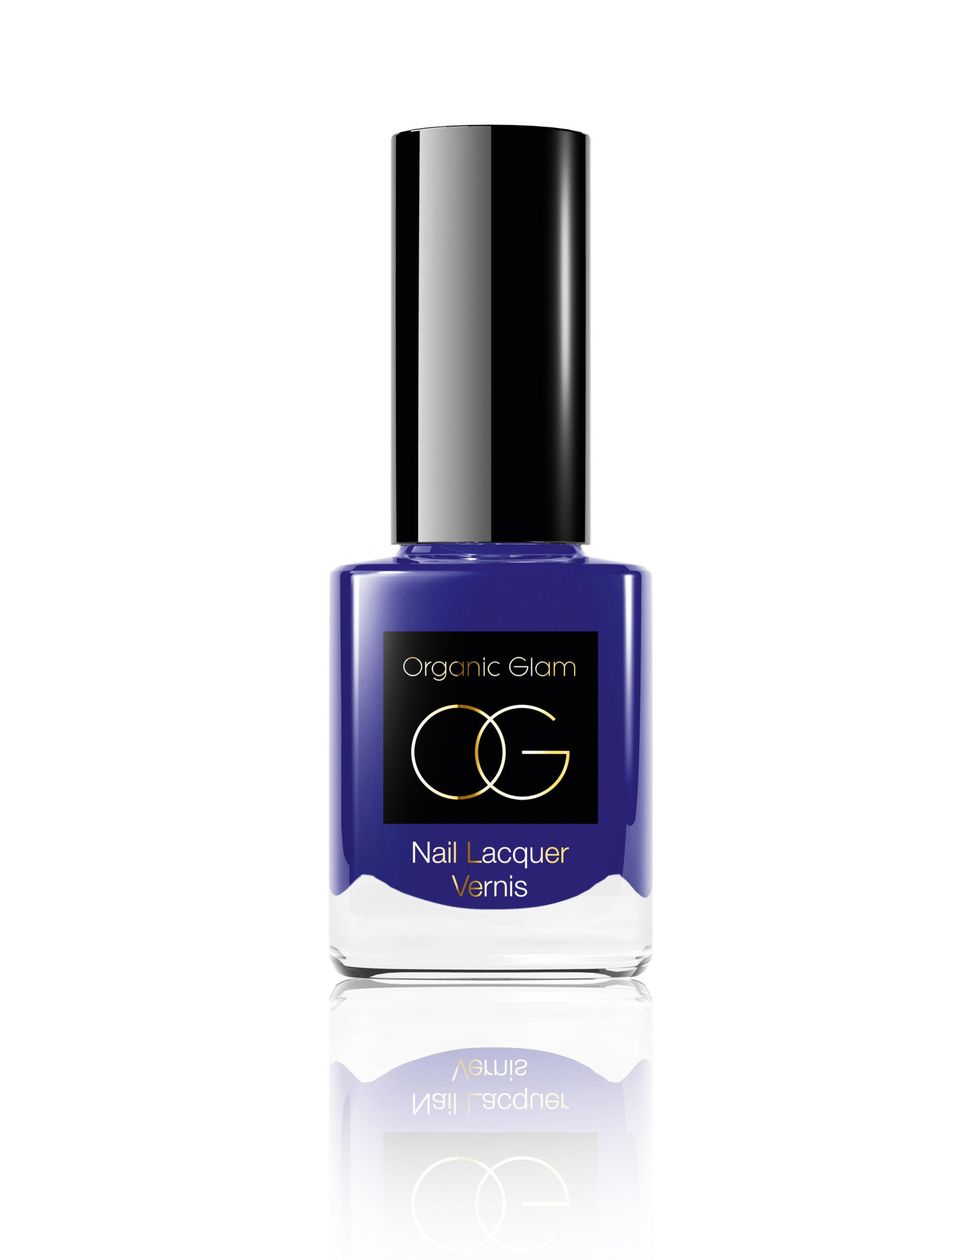 <p>A purple-toned blue that packs a punch in an organic formula? We'll race you to the till to nab this vibrant, on-trend shade. Not only is it a cool update to replace winter black manis, but it's ideal for sultry summer nights paired up against a tan.</p>
<p><a href="http://www.theorganicpharmacy.com/organicglam-makeup/nails/nail-polish" target="_blank">Organic Glam Nail Polish in New York, £10</a></p>
<p><a href="http://www.cosmopolitan.co.uk/beauty-hair/news/trends/nail-trends-spring-summer-2014" target="_blank">THE BIG 2014 NAIL TRENDS</a></p>
<p><a href="http://www.cosmopolitan.co.uk/beauty-hair/news/trends/celebrity-beauty/celebrity-nail-art-manicures" target="_blank">CELEBRITY NAIL ART TRENDS</a></p>
<p><a href="http://www.cosmopolitan.co.uk/beauty-hair/news/trends/makeup-trends-spring-summer-2014" target="_blank">9 BIG BEAUTY TRENDS FOR SS14</a></p>